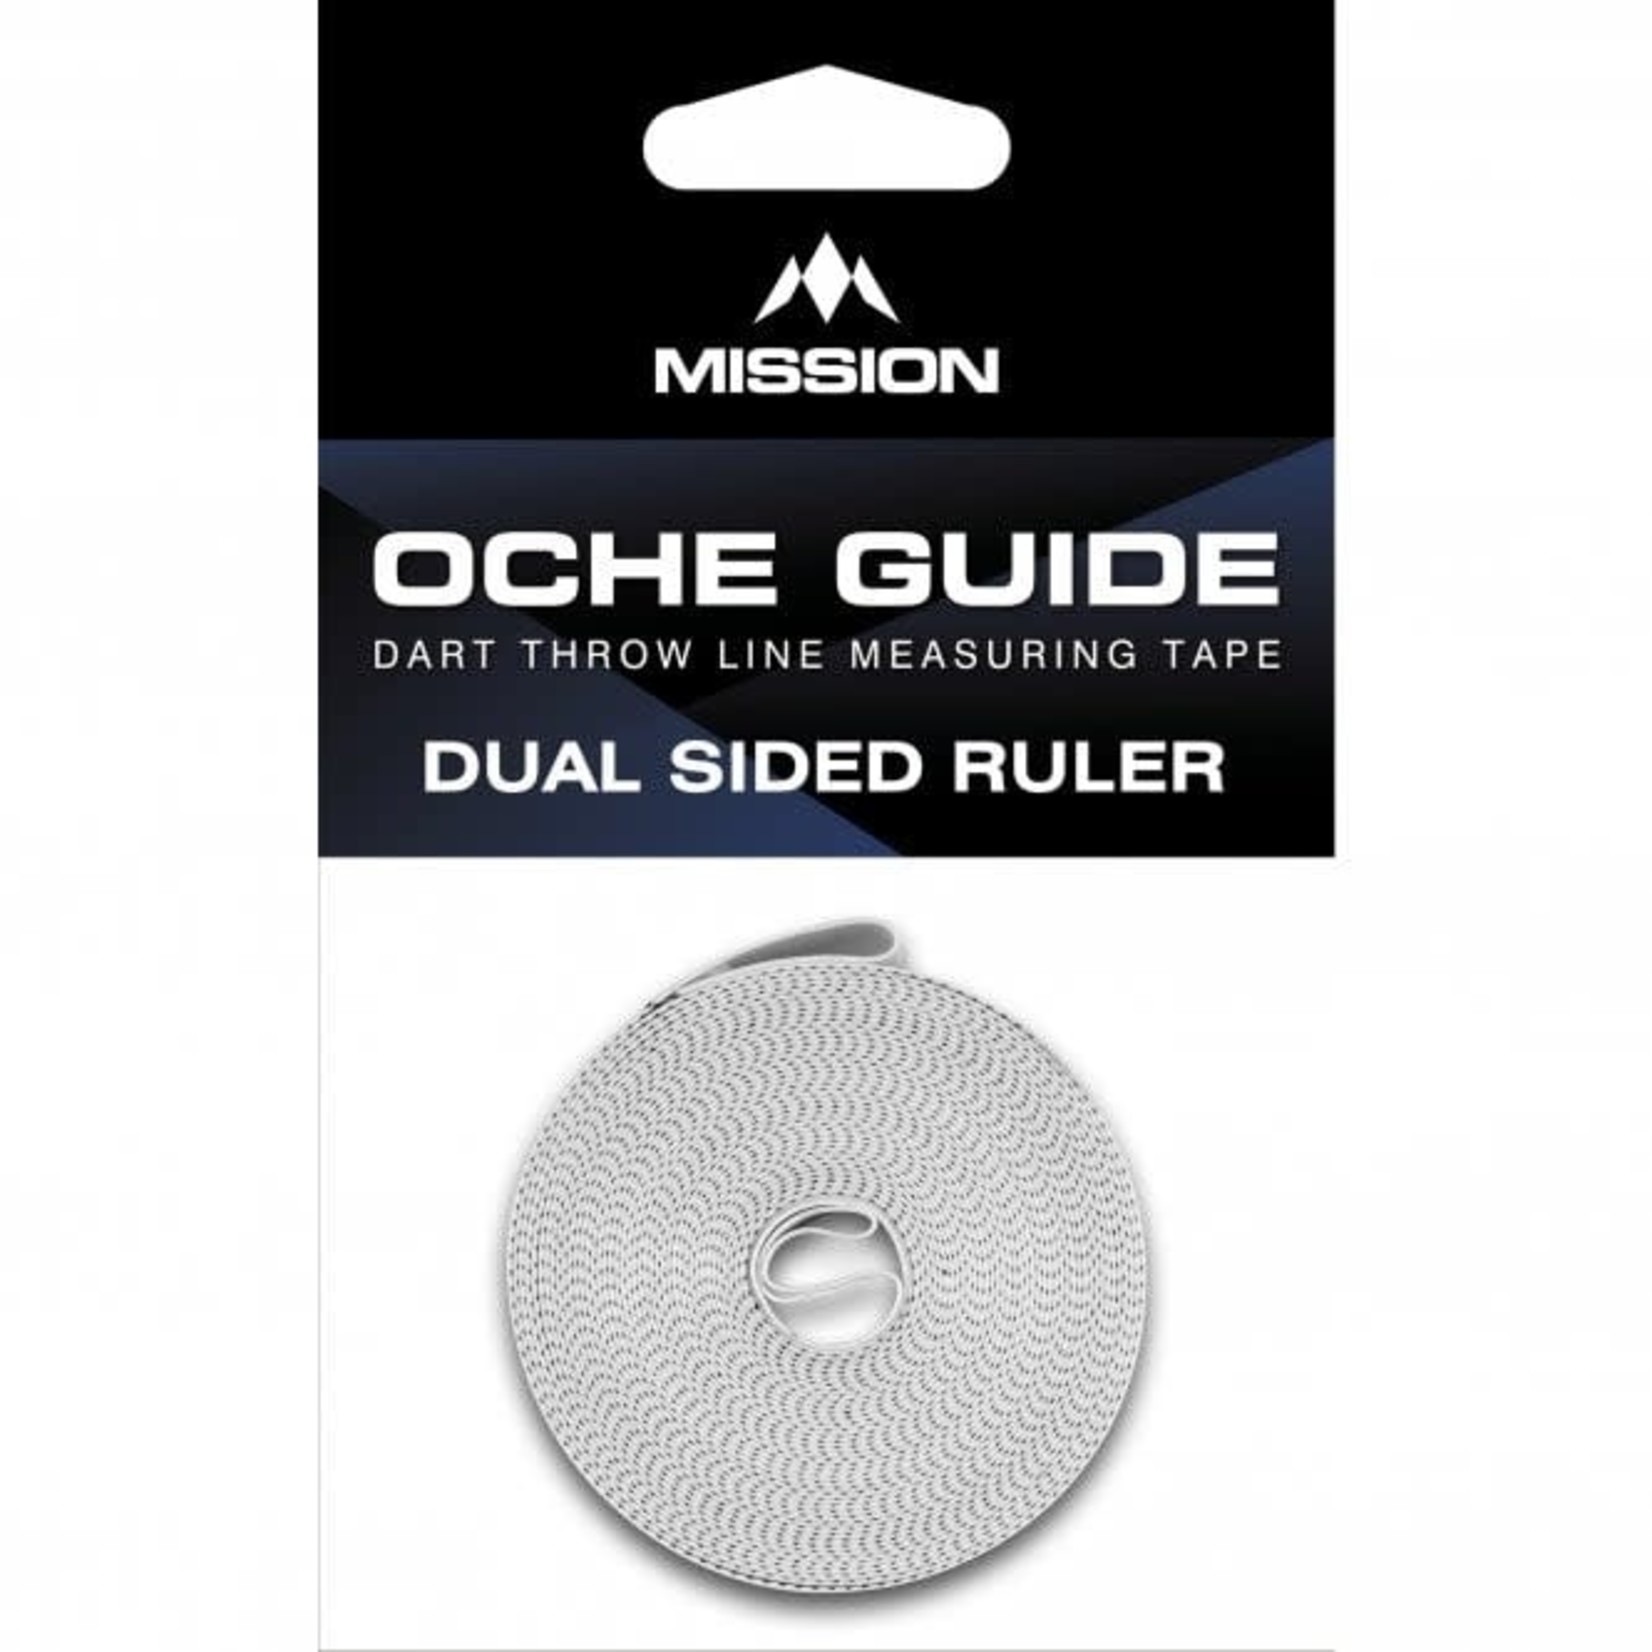 Mission Darts Mission Oche Guide Dual Sided